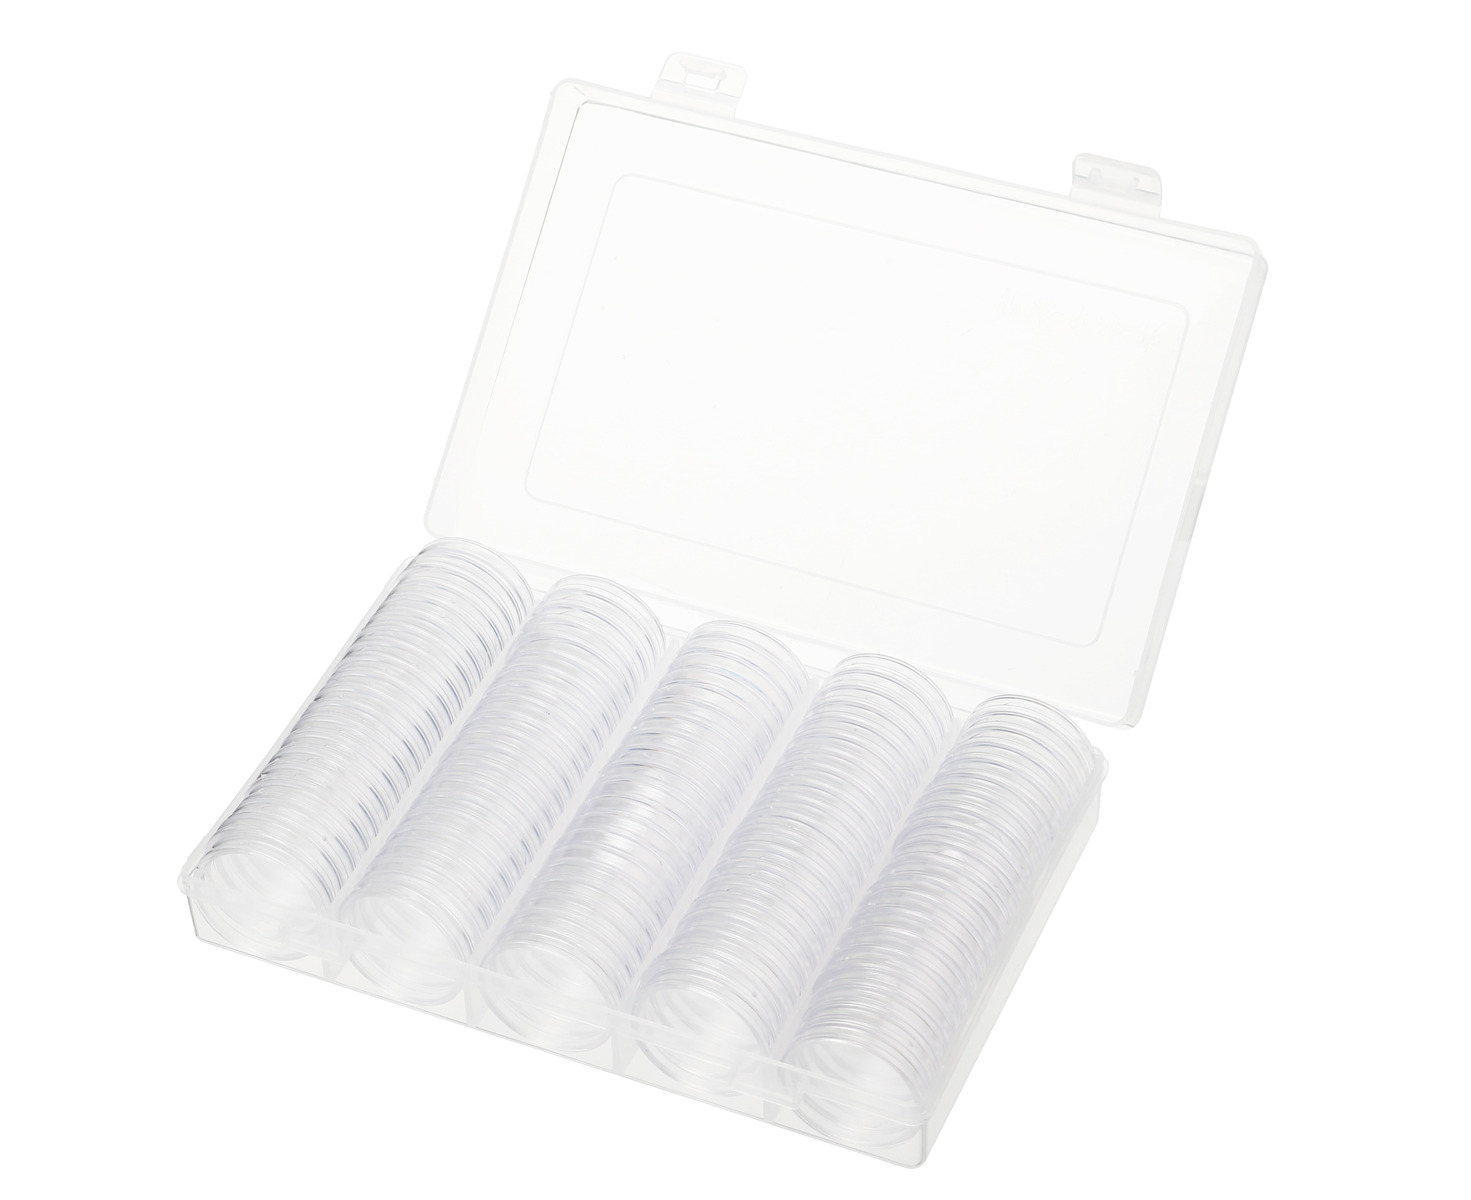 Coin Storage Box 30mm Clear Round Boxed Coin Holder Plastic Capsules Display Cases Organizer for Coin Collection Supplies 